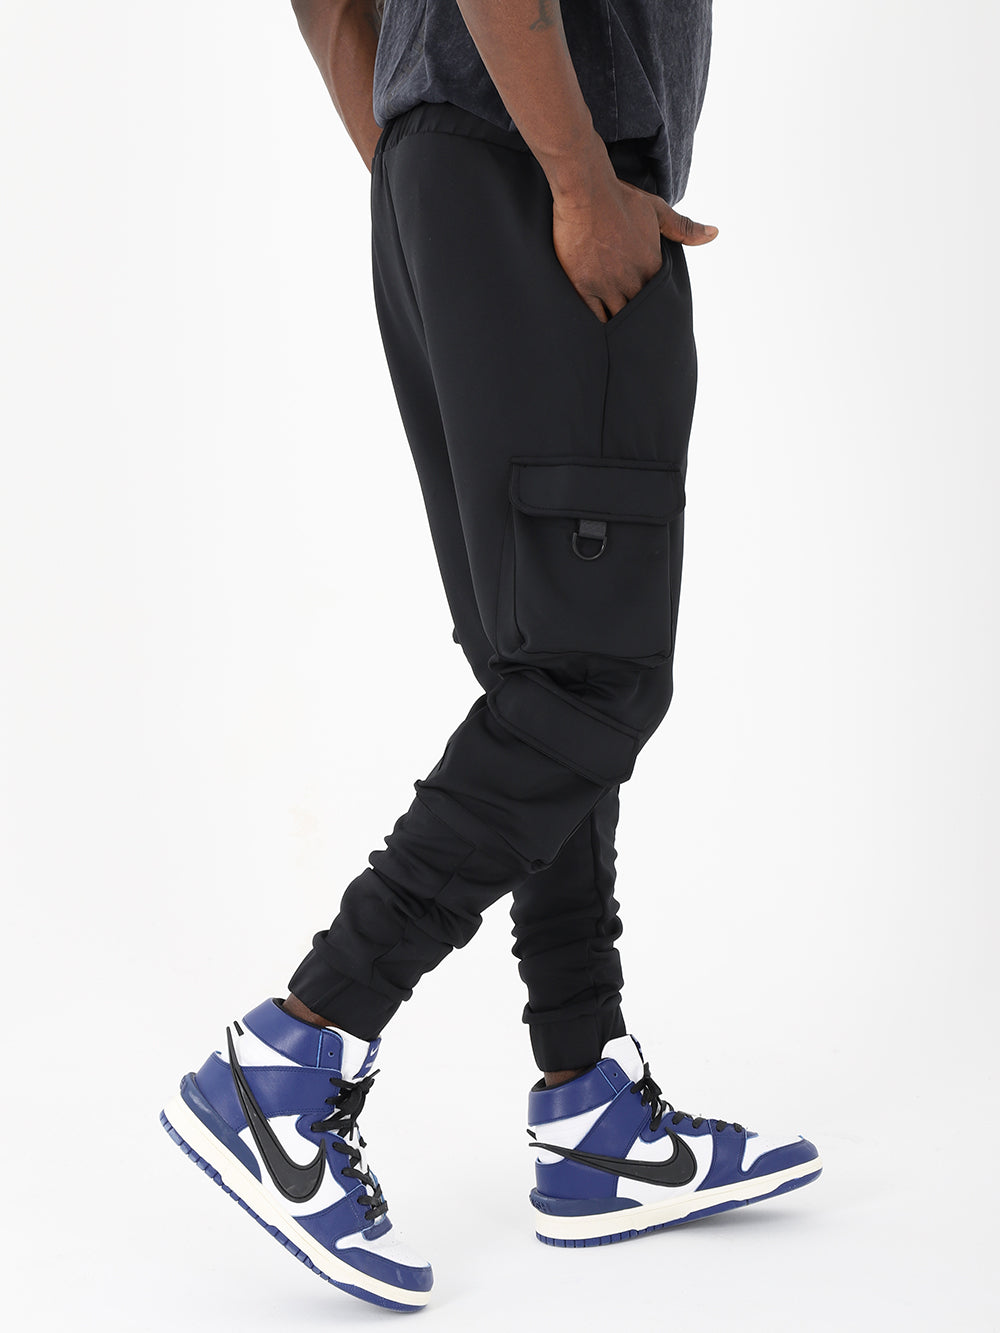 A man sporting VENTURA joggers with adjustable ankle cuffs and sneakers.